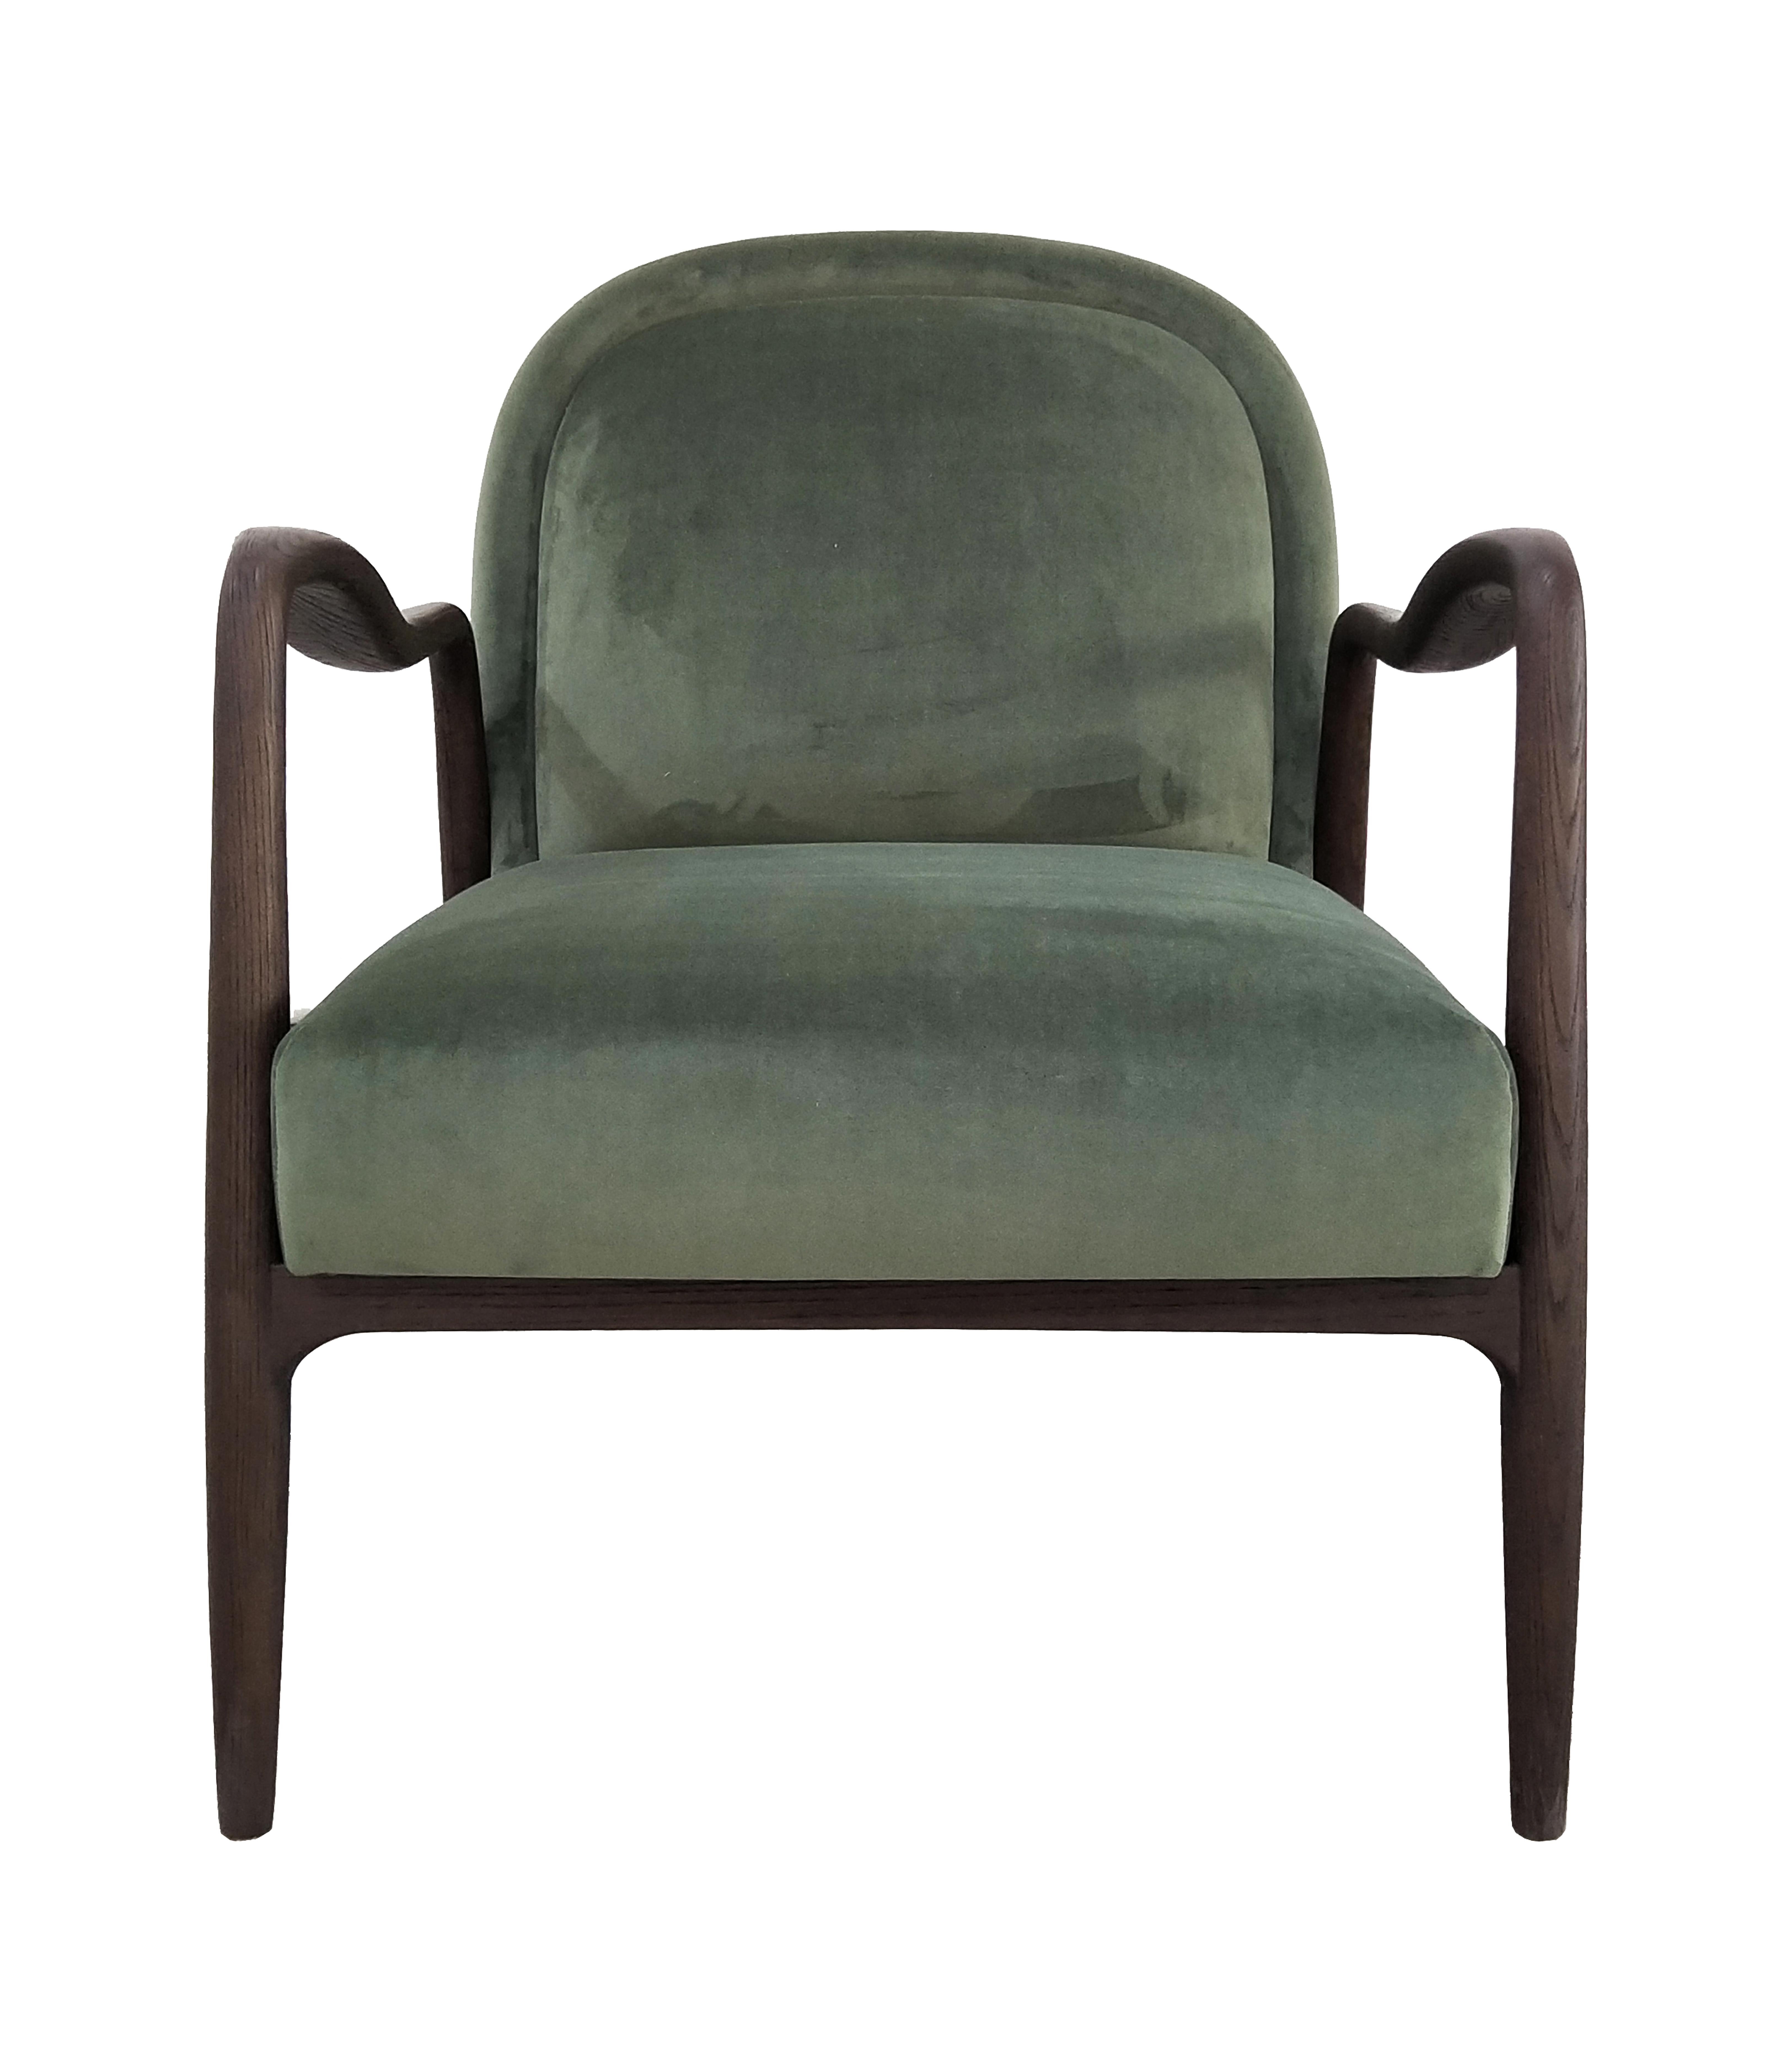 Upholstered armchair.
Velvet like touch olive green color fabric.
Solid oak and handmade.

Description: Armchair
Color: Brown and Olive Green
Size: 72 x 82 x 78H cm
Material: Oak and Fabric
Collection: Mid Century Rhythm